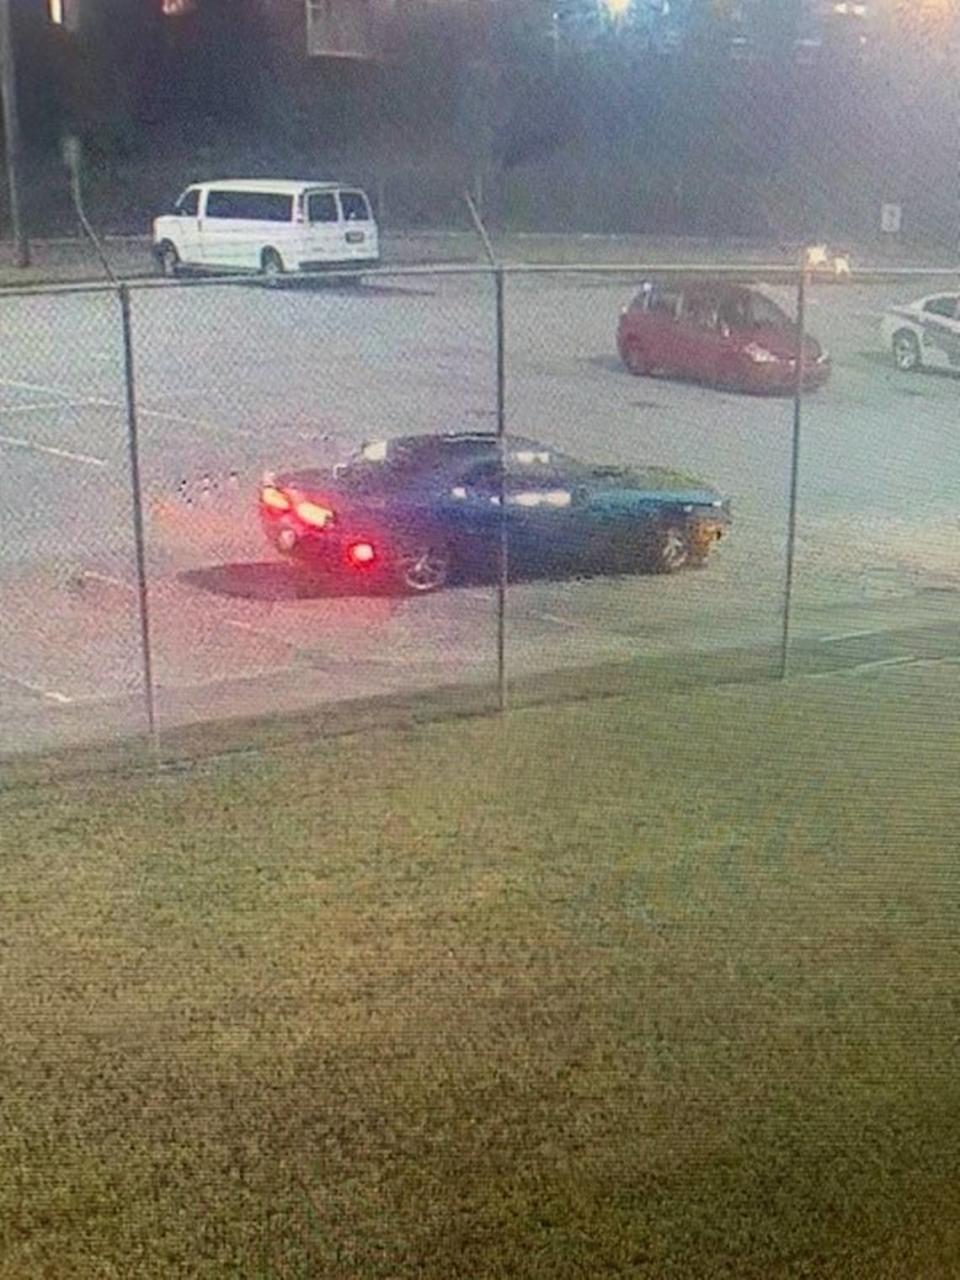 Four inmates escaped from the Bibb County jail in downtown Macon early Monday morning in this blue Dodge Challenger, the sheriff’s office said. Courtesy of the Bibb County Sheriff's Office